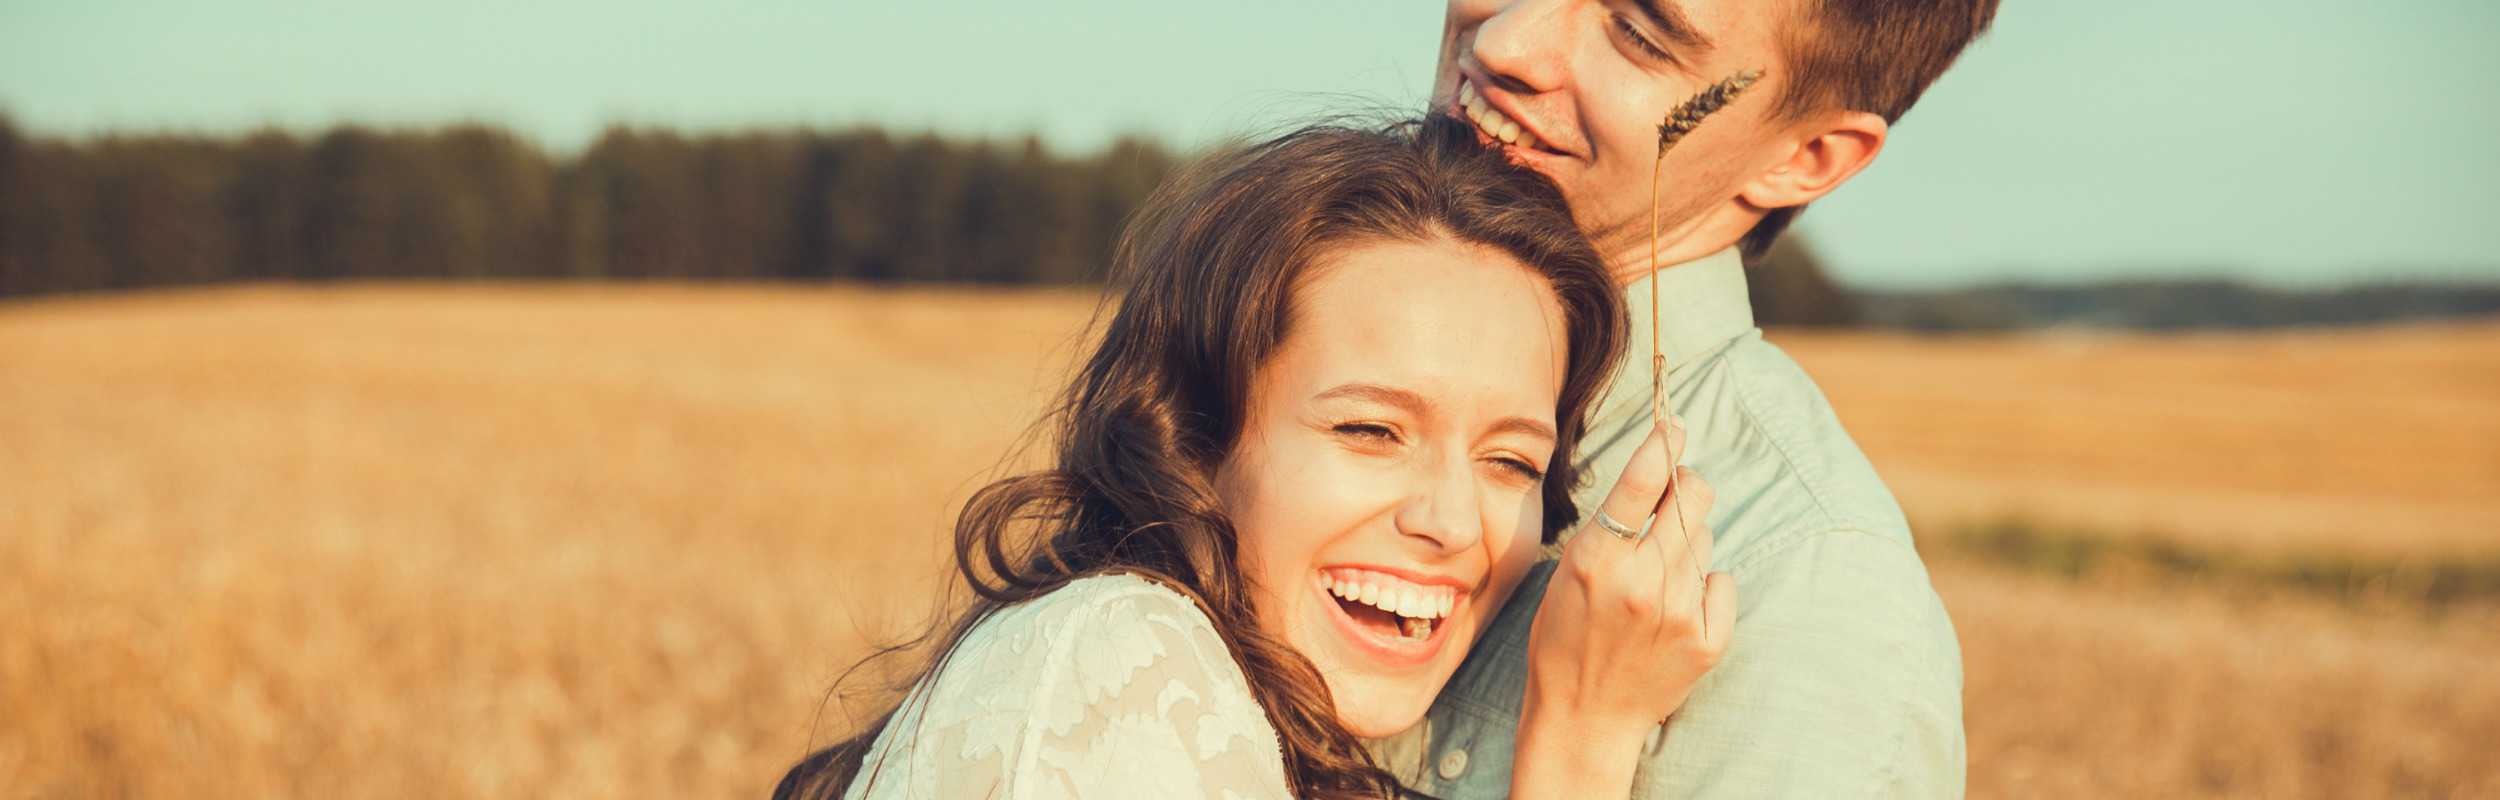 20 Ways to Make Someone You Love Feel Special